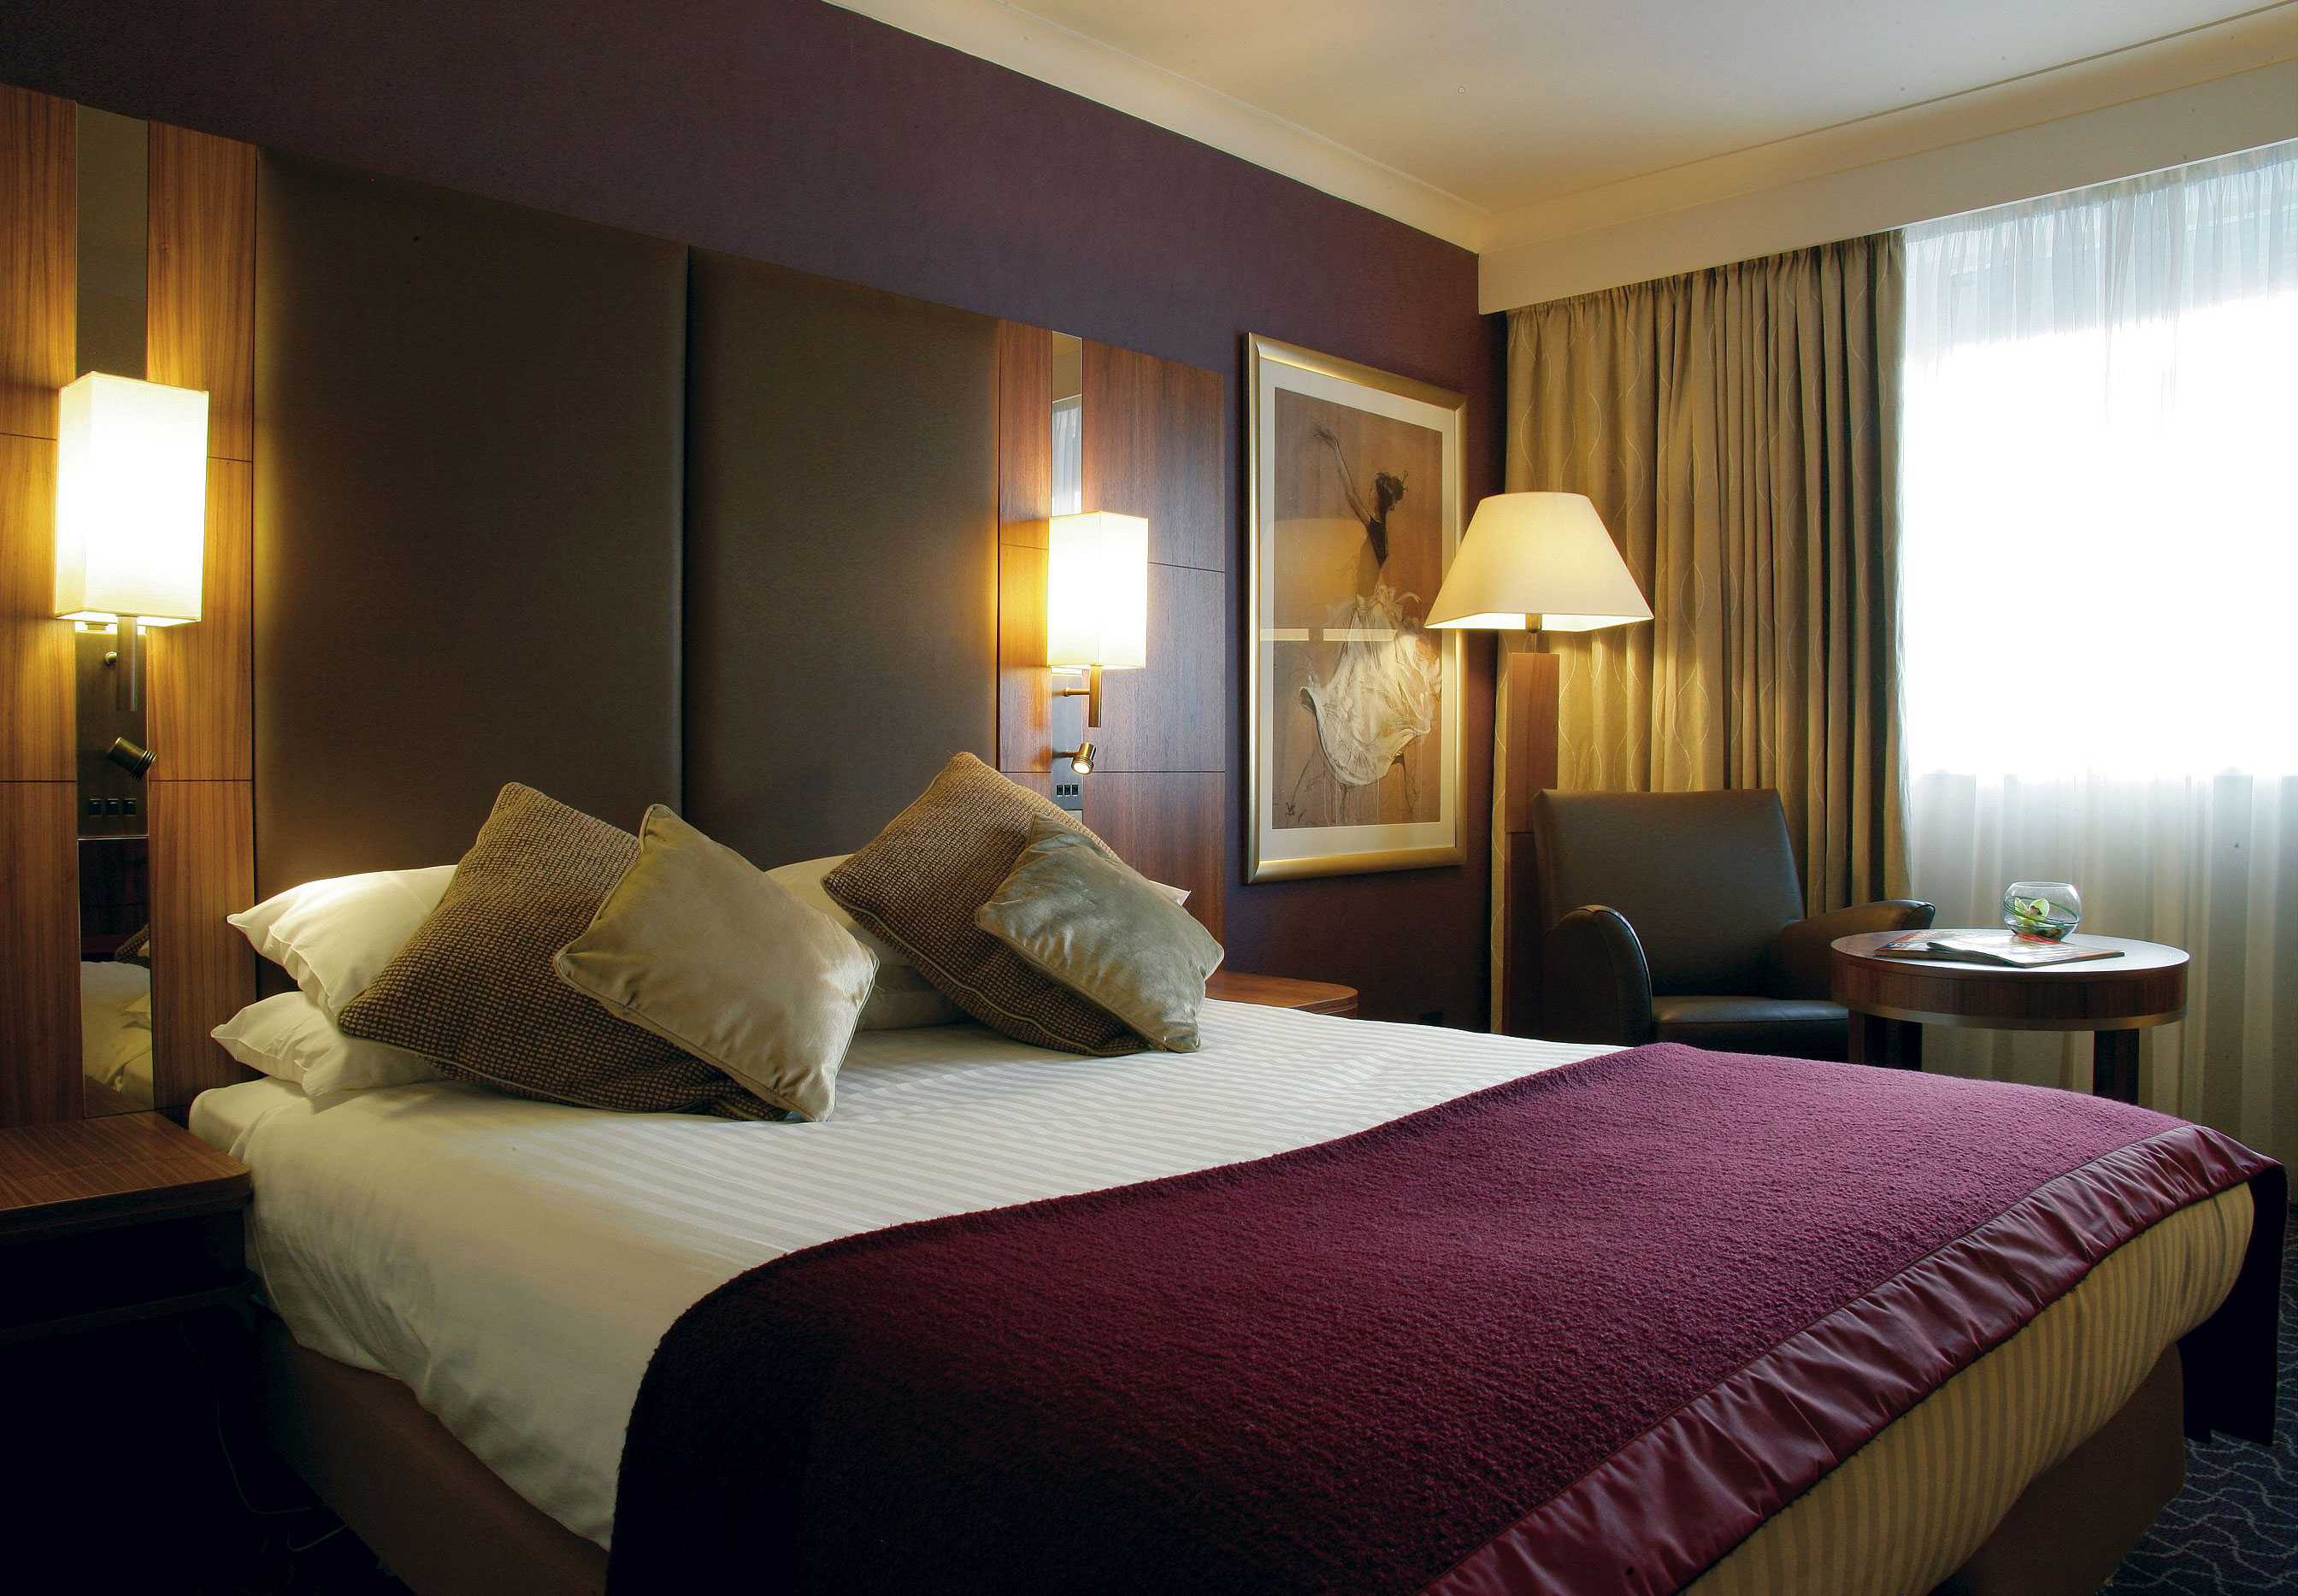 One Night Stay for Two at the Crowne Plaza Reading